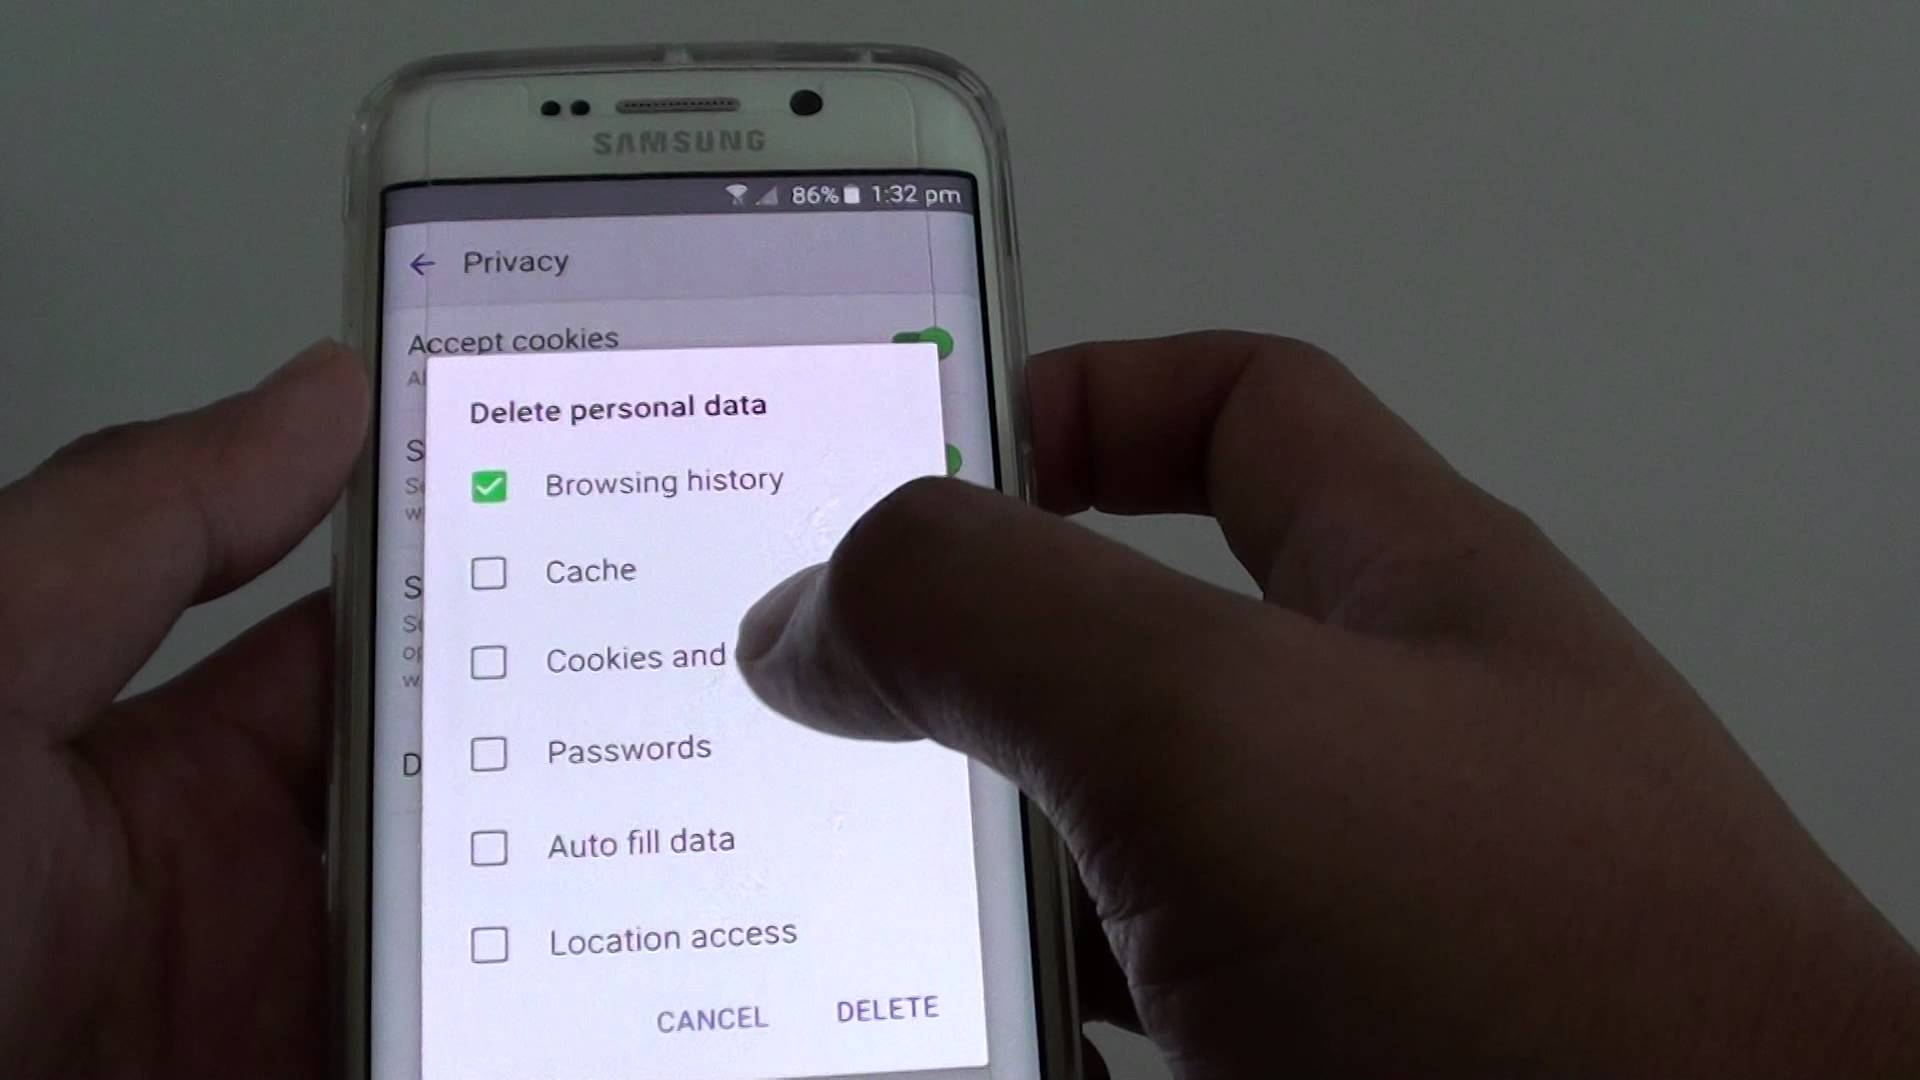 Section 2: How to Show and Clear Mobile Phones Browsing History 